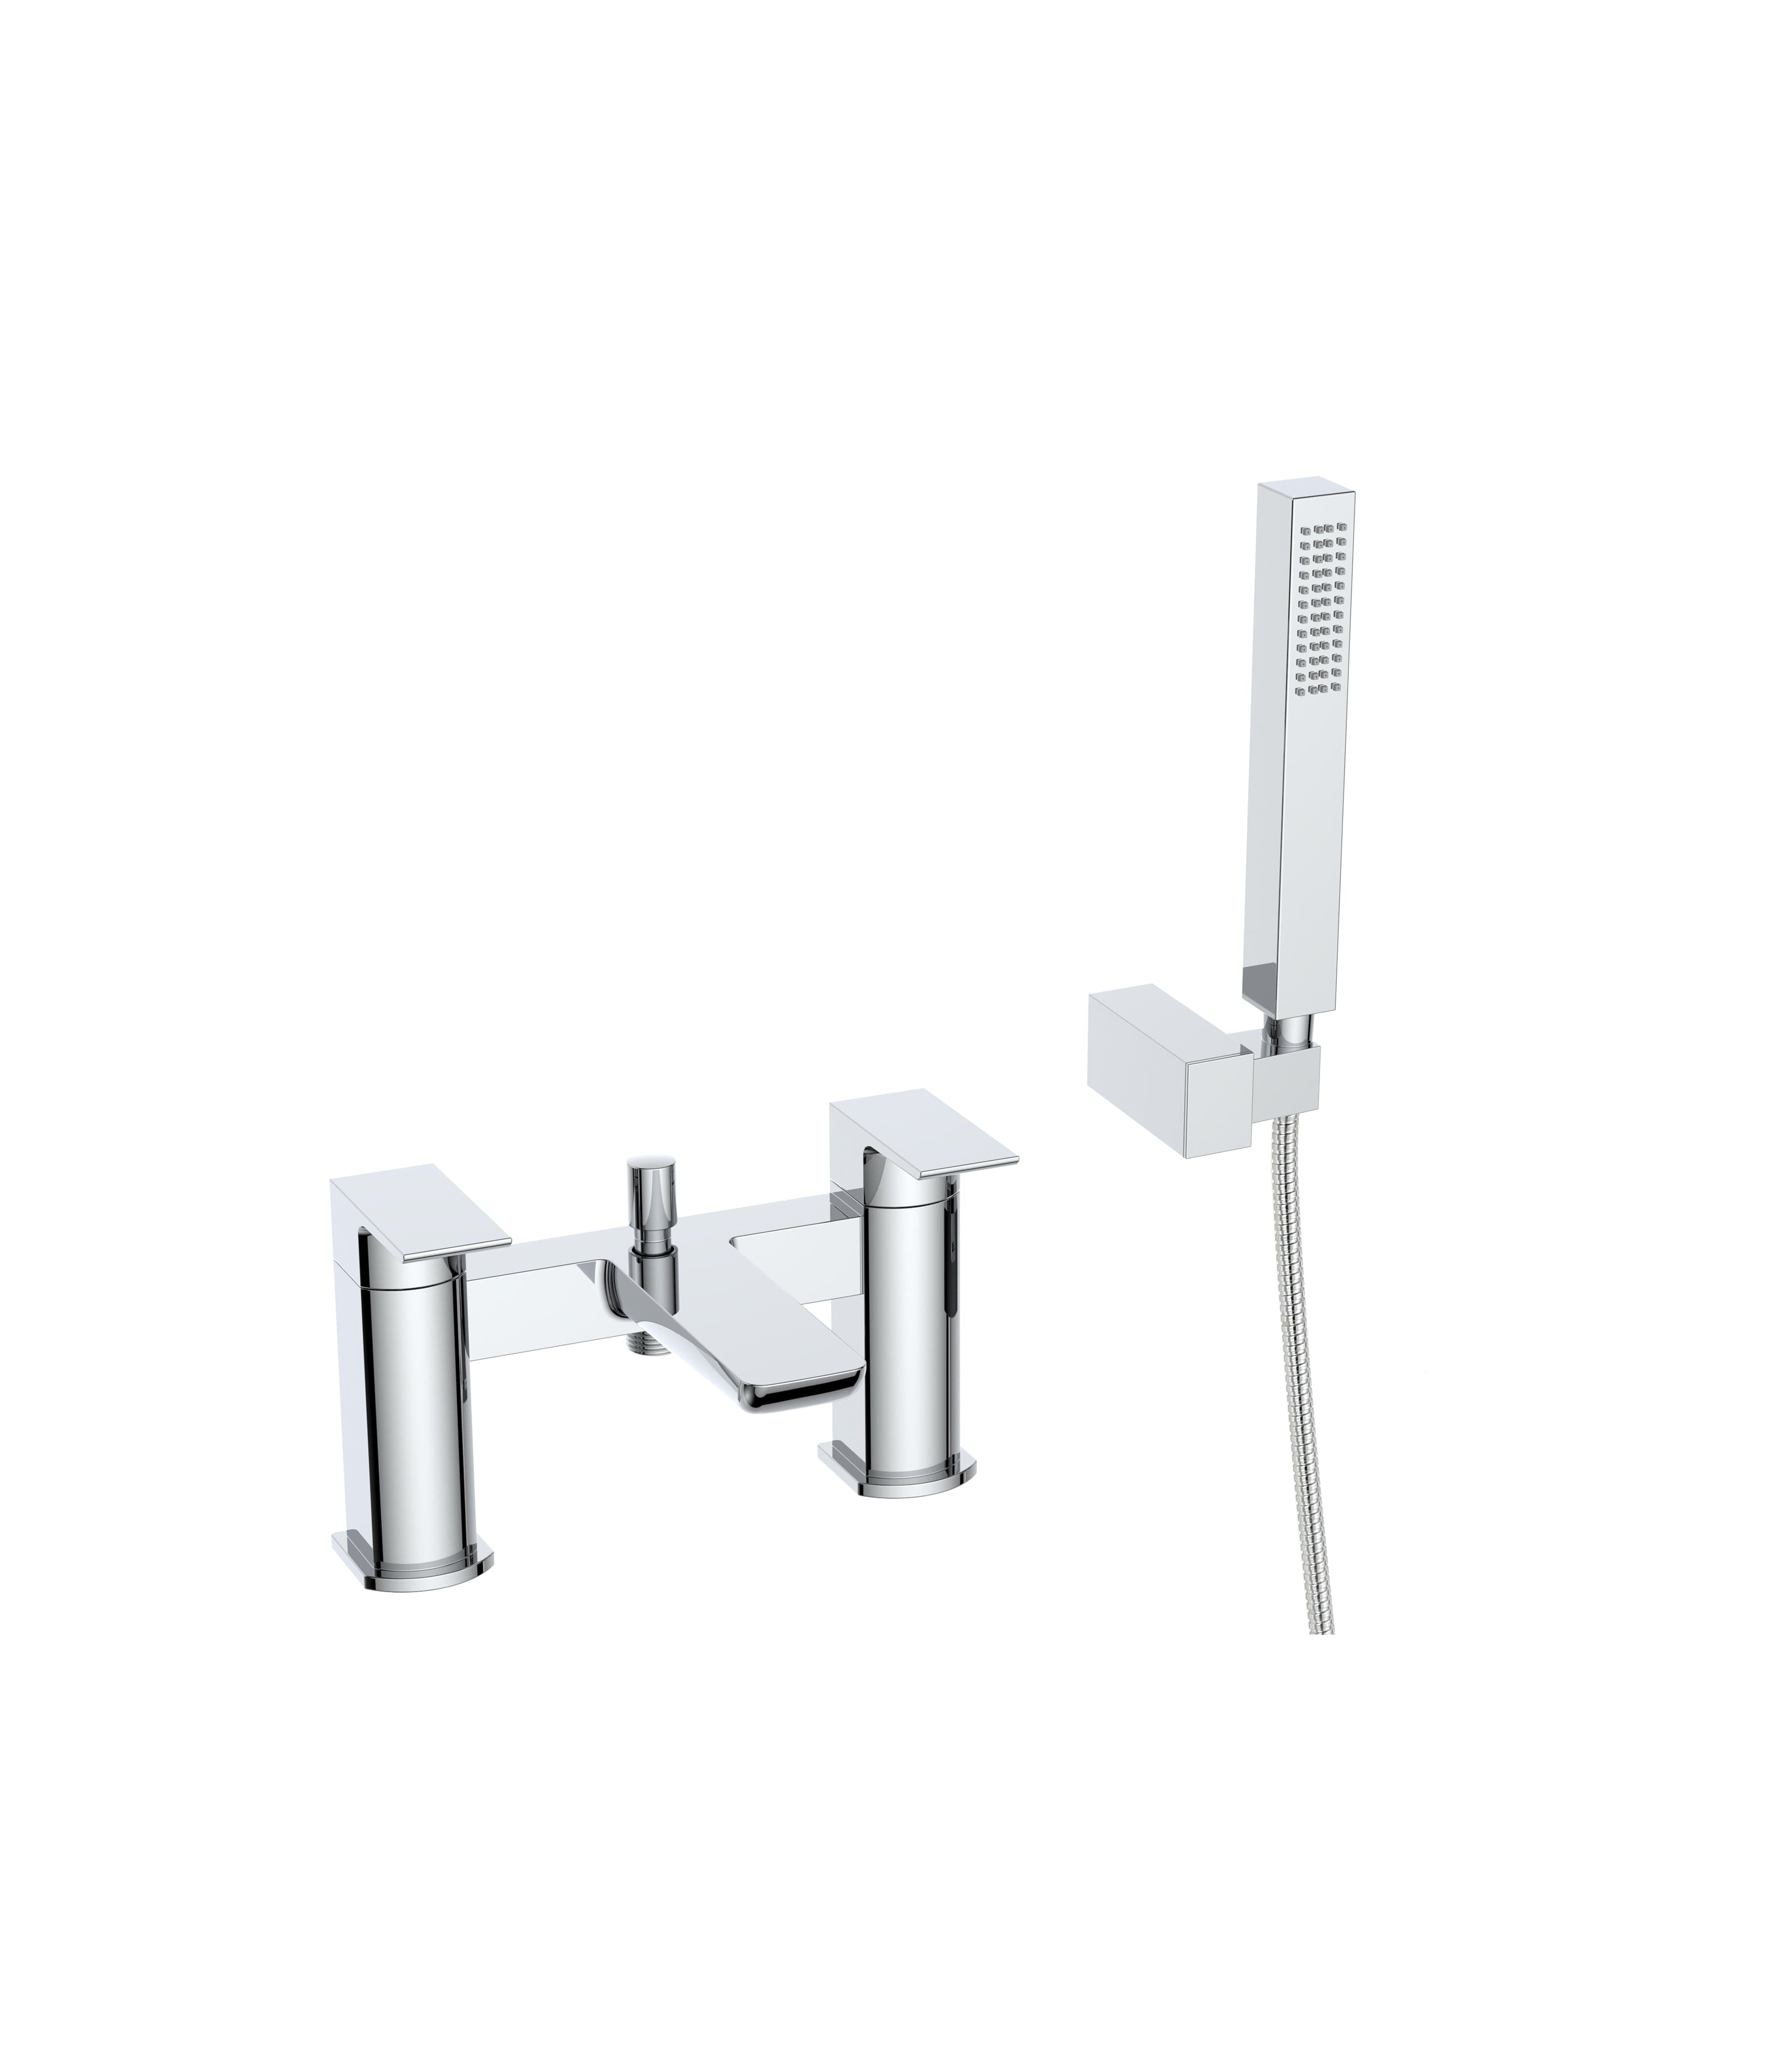 Lunar Soft Square Bath Shower Mixer Tap with Kit - Chrome. Stylish bathroom essential for modern homes. Buy now at Bathroom4Less.